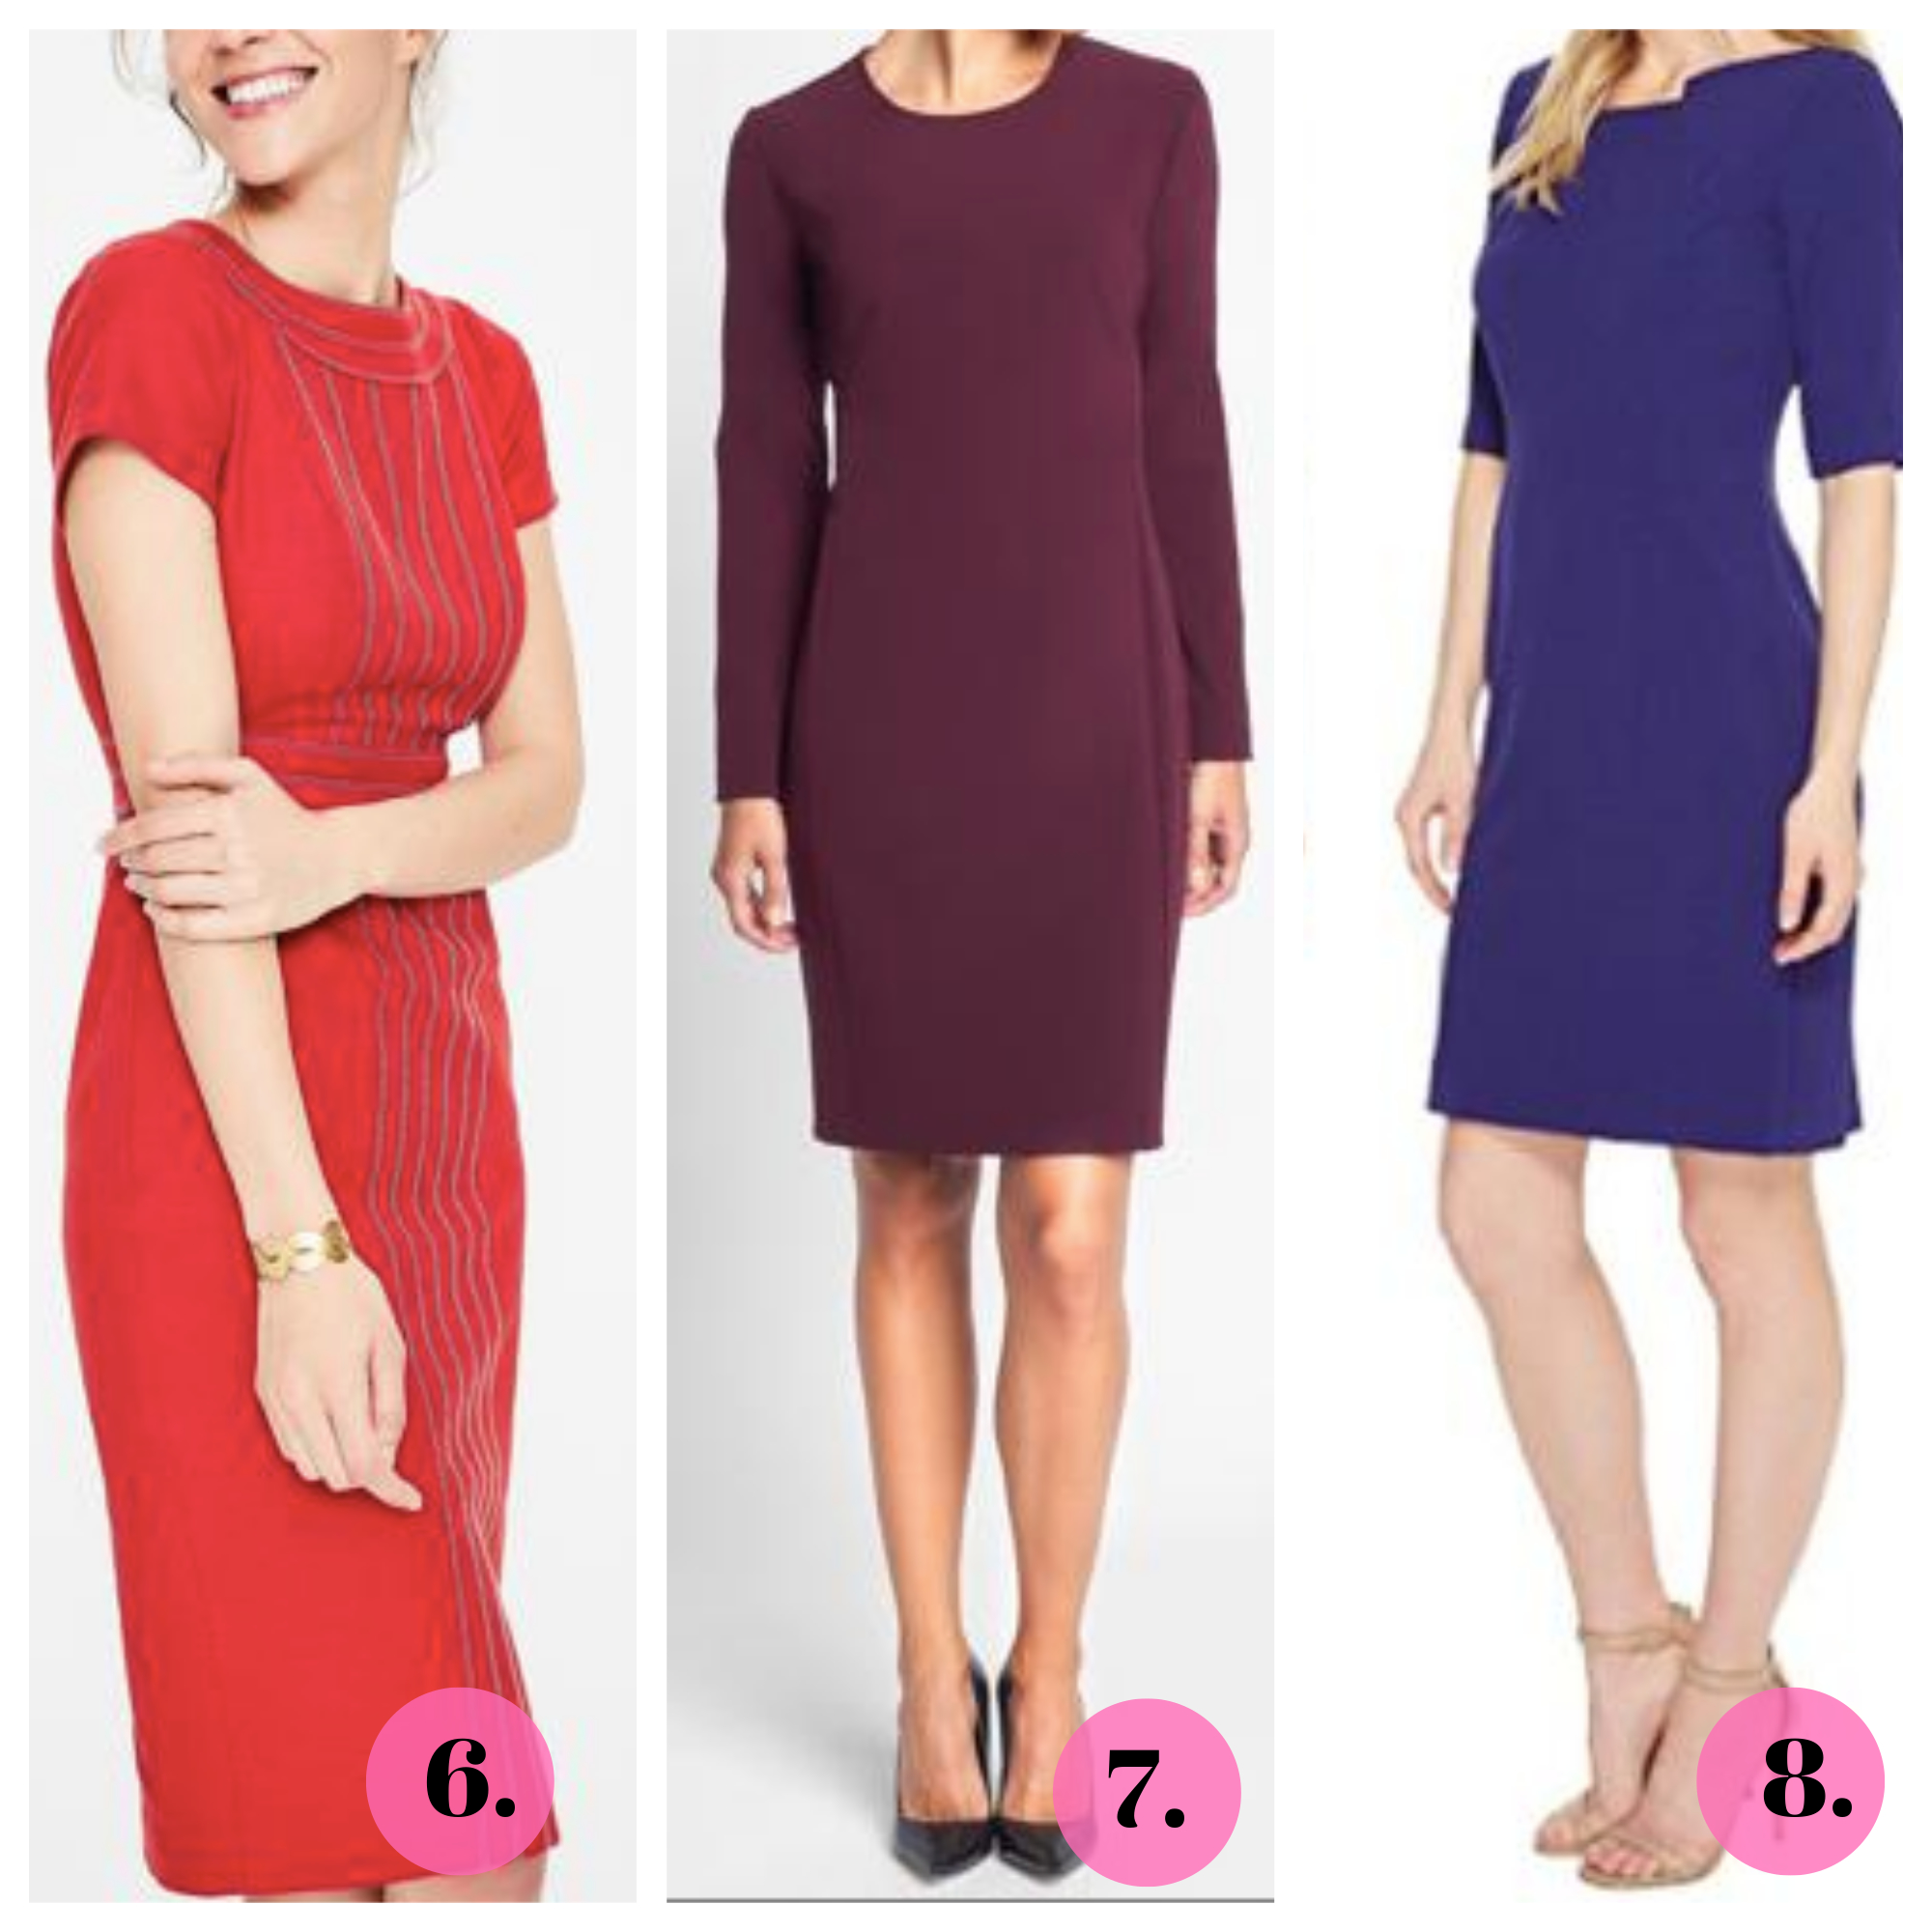 solid colored dresses in red and purple